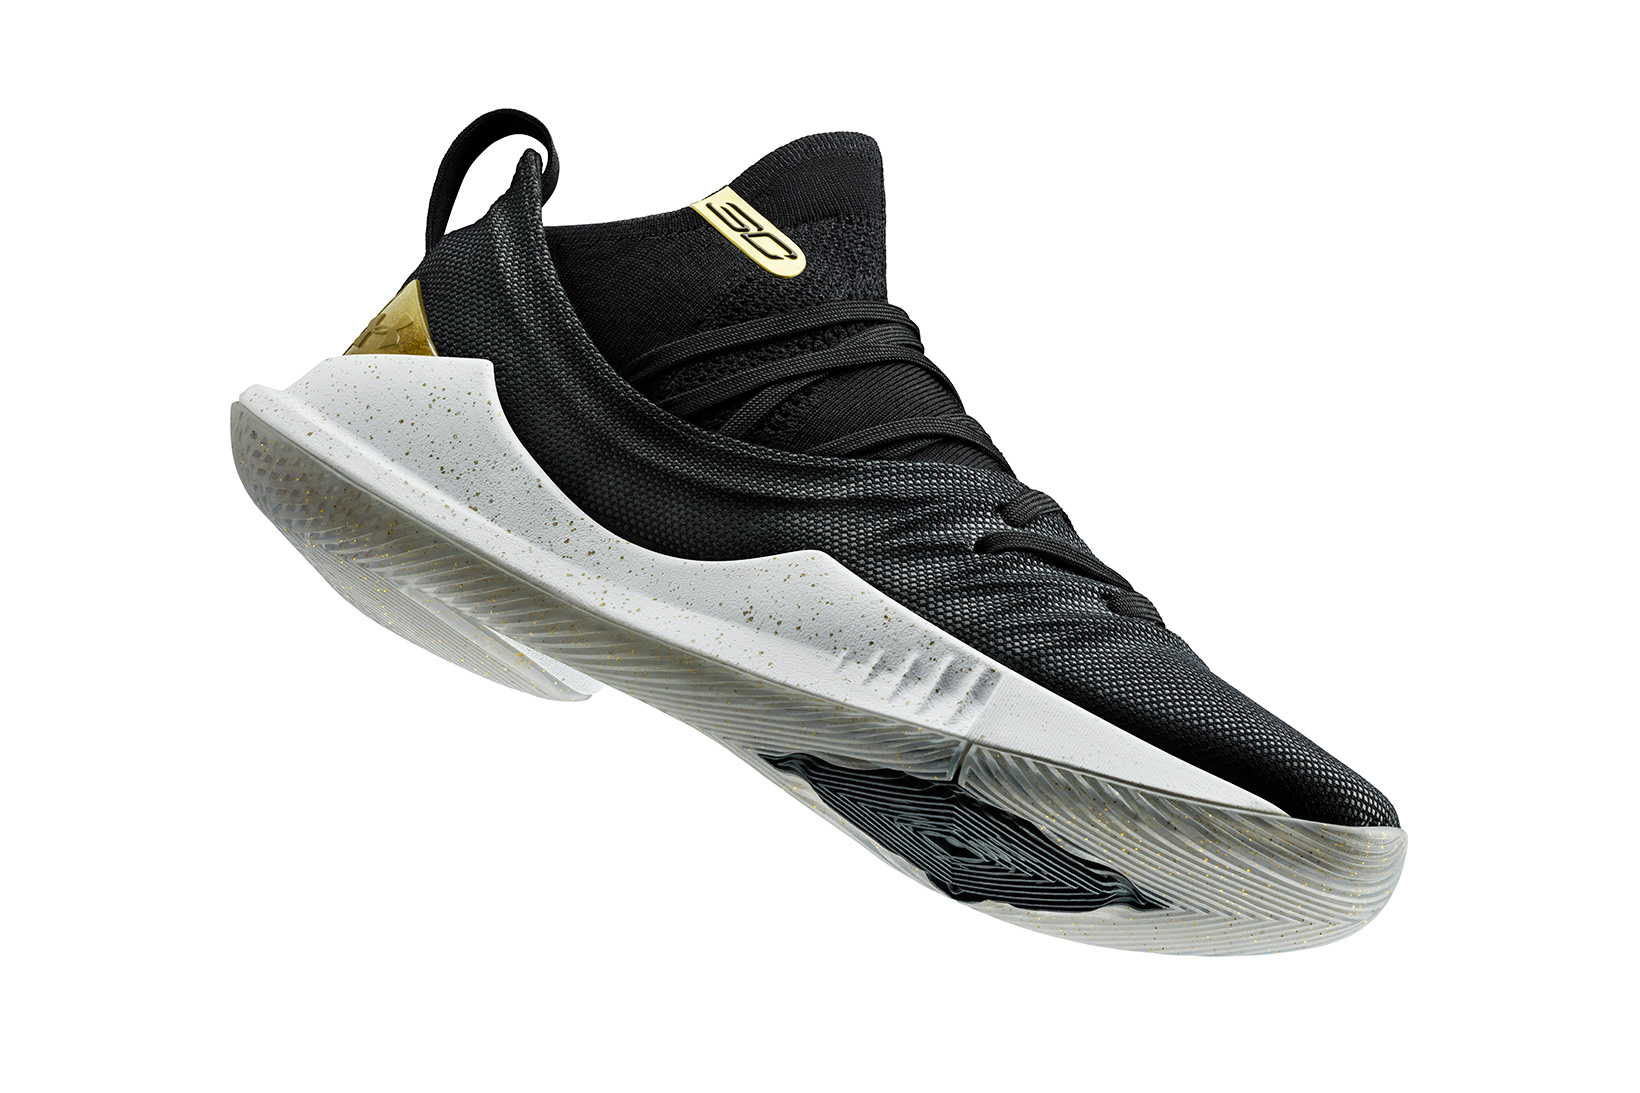 curry 5 black and gold